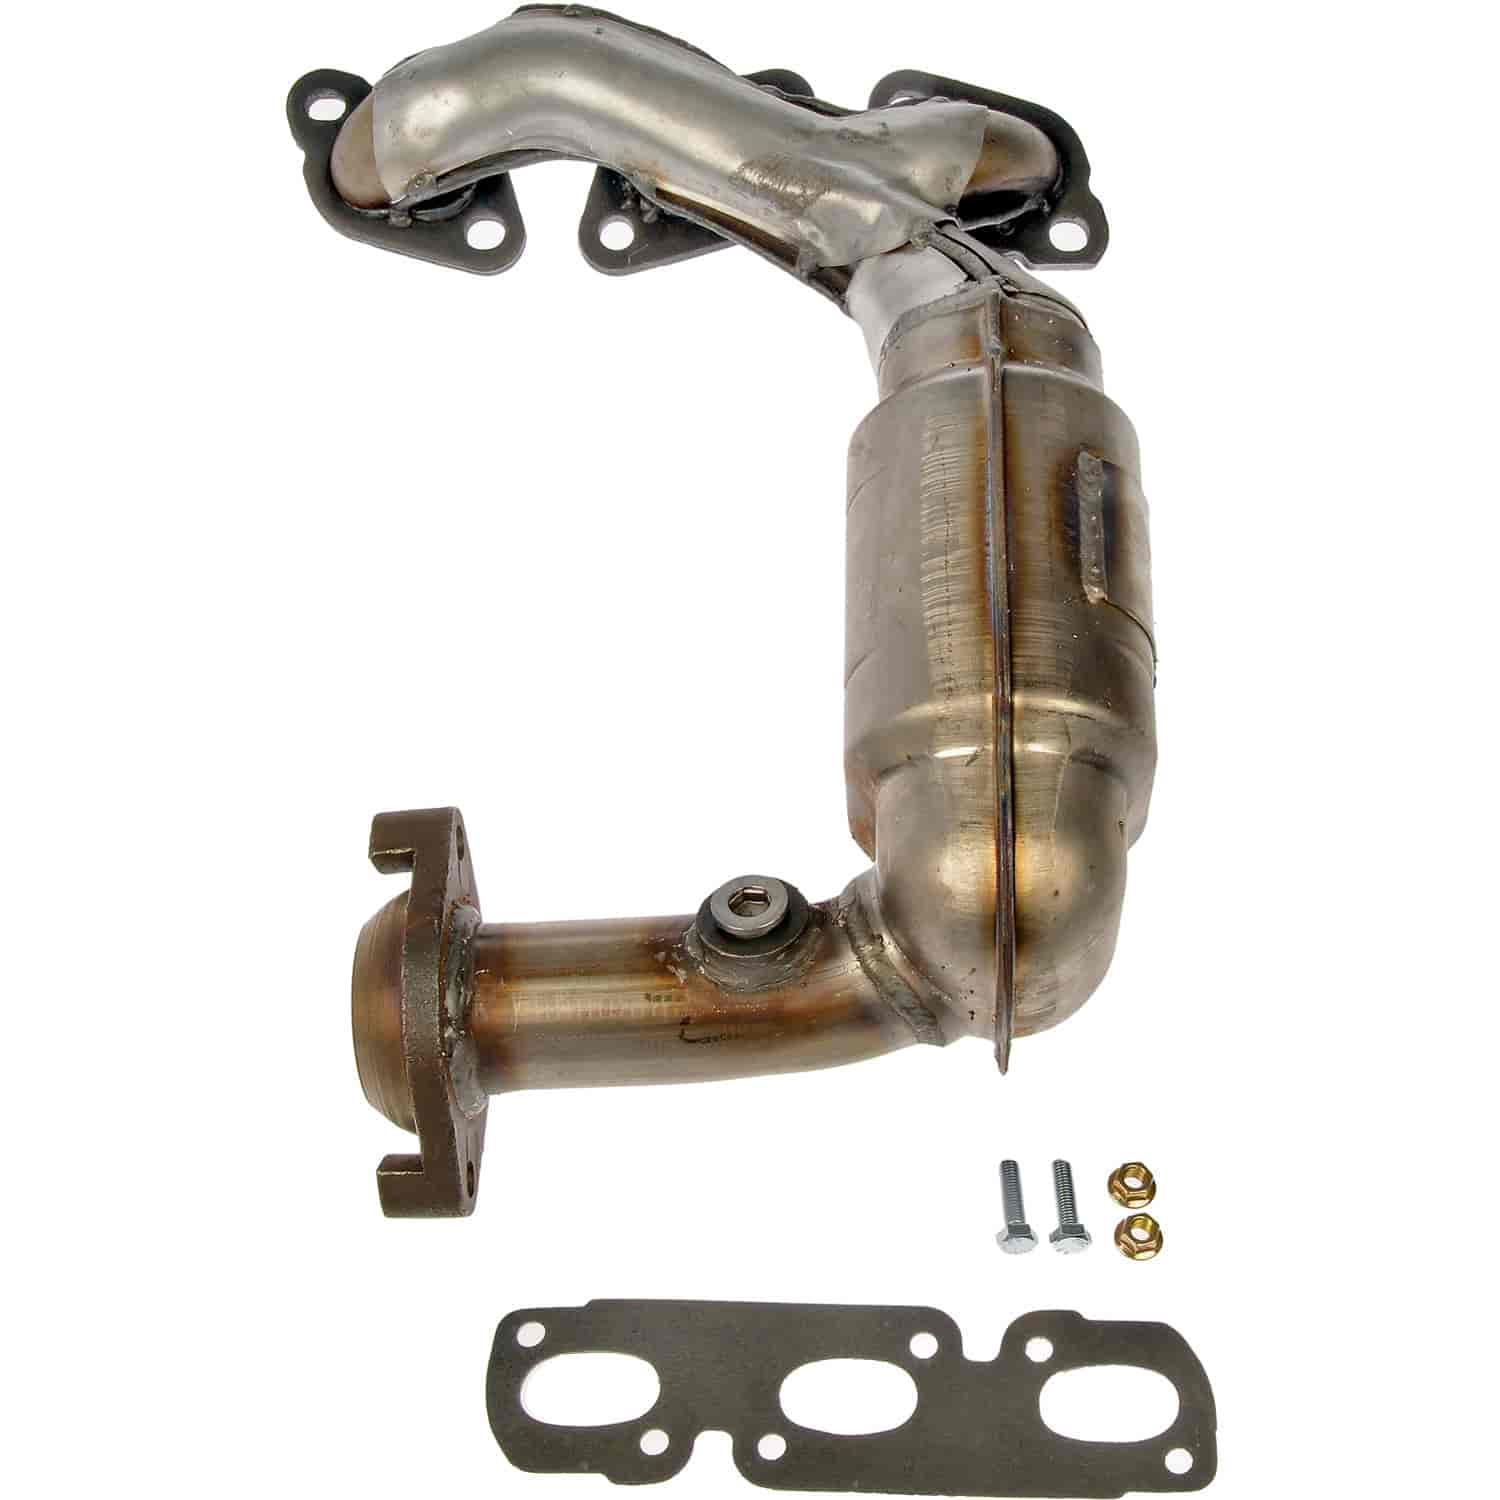 Manifold Converter - Carb Compliant - For Legal